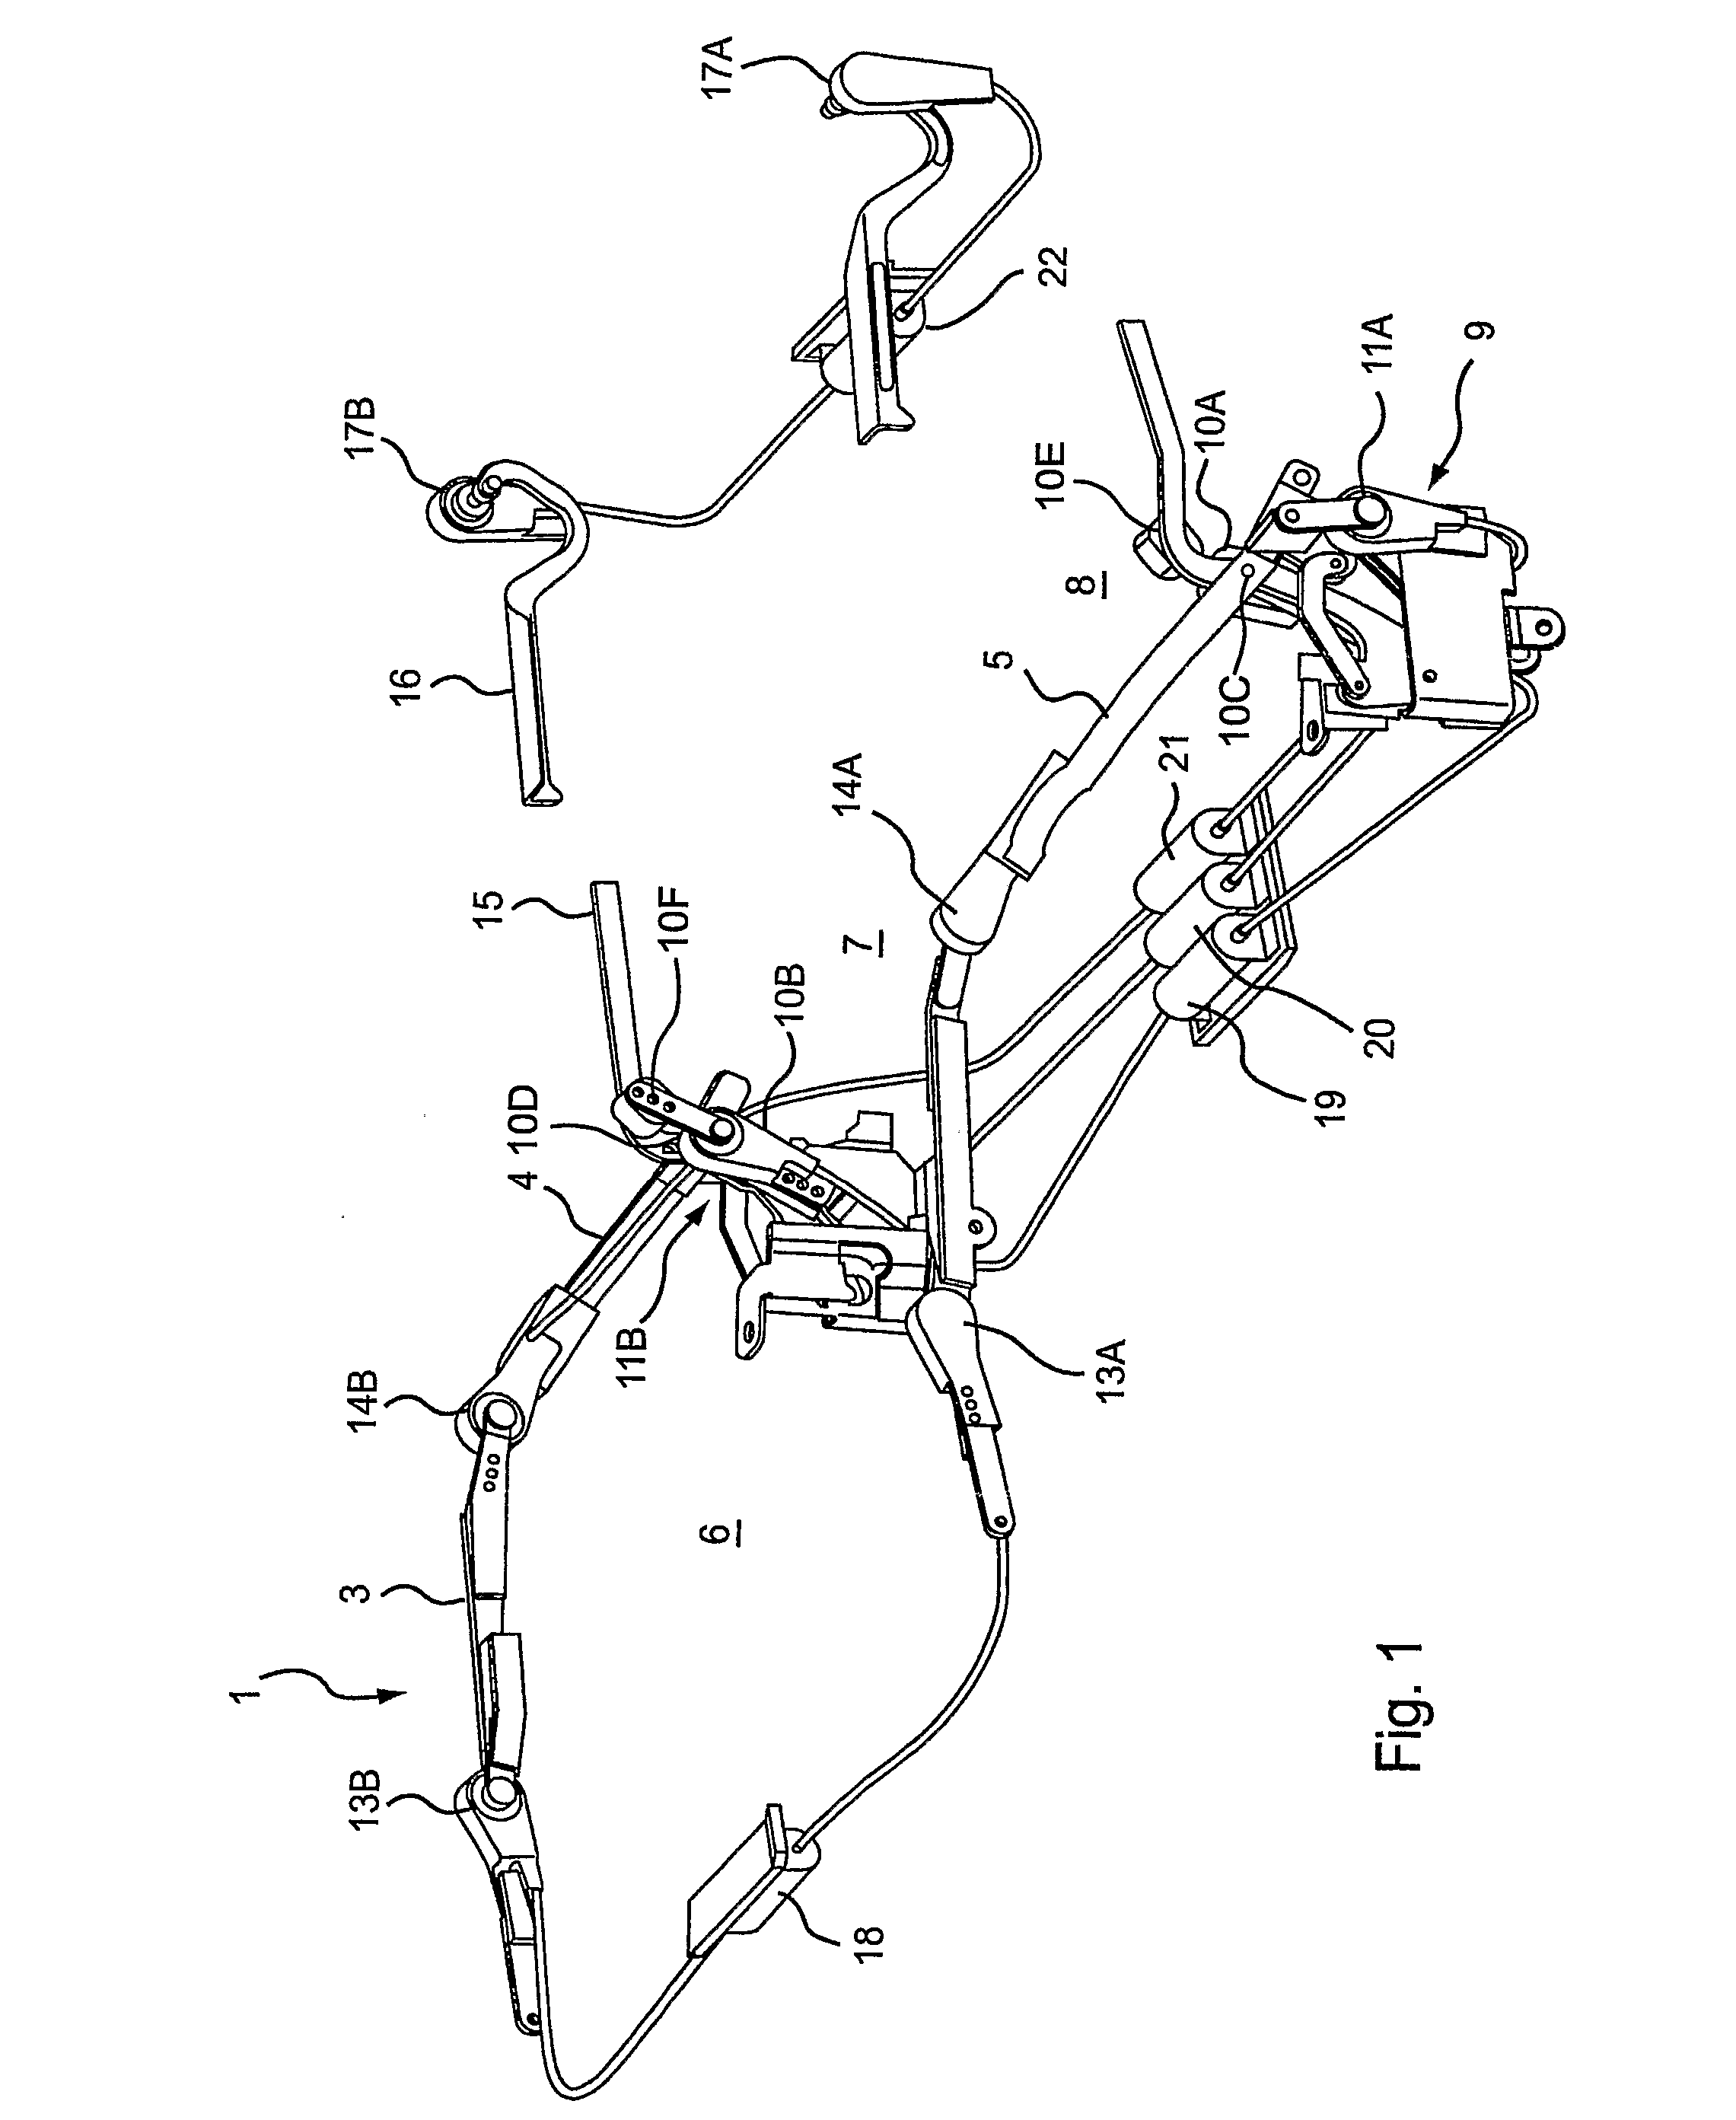 Device for actuating at least one pivoted exterior element of a vehicle